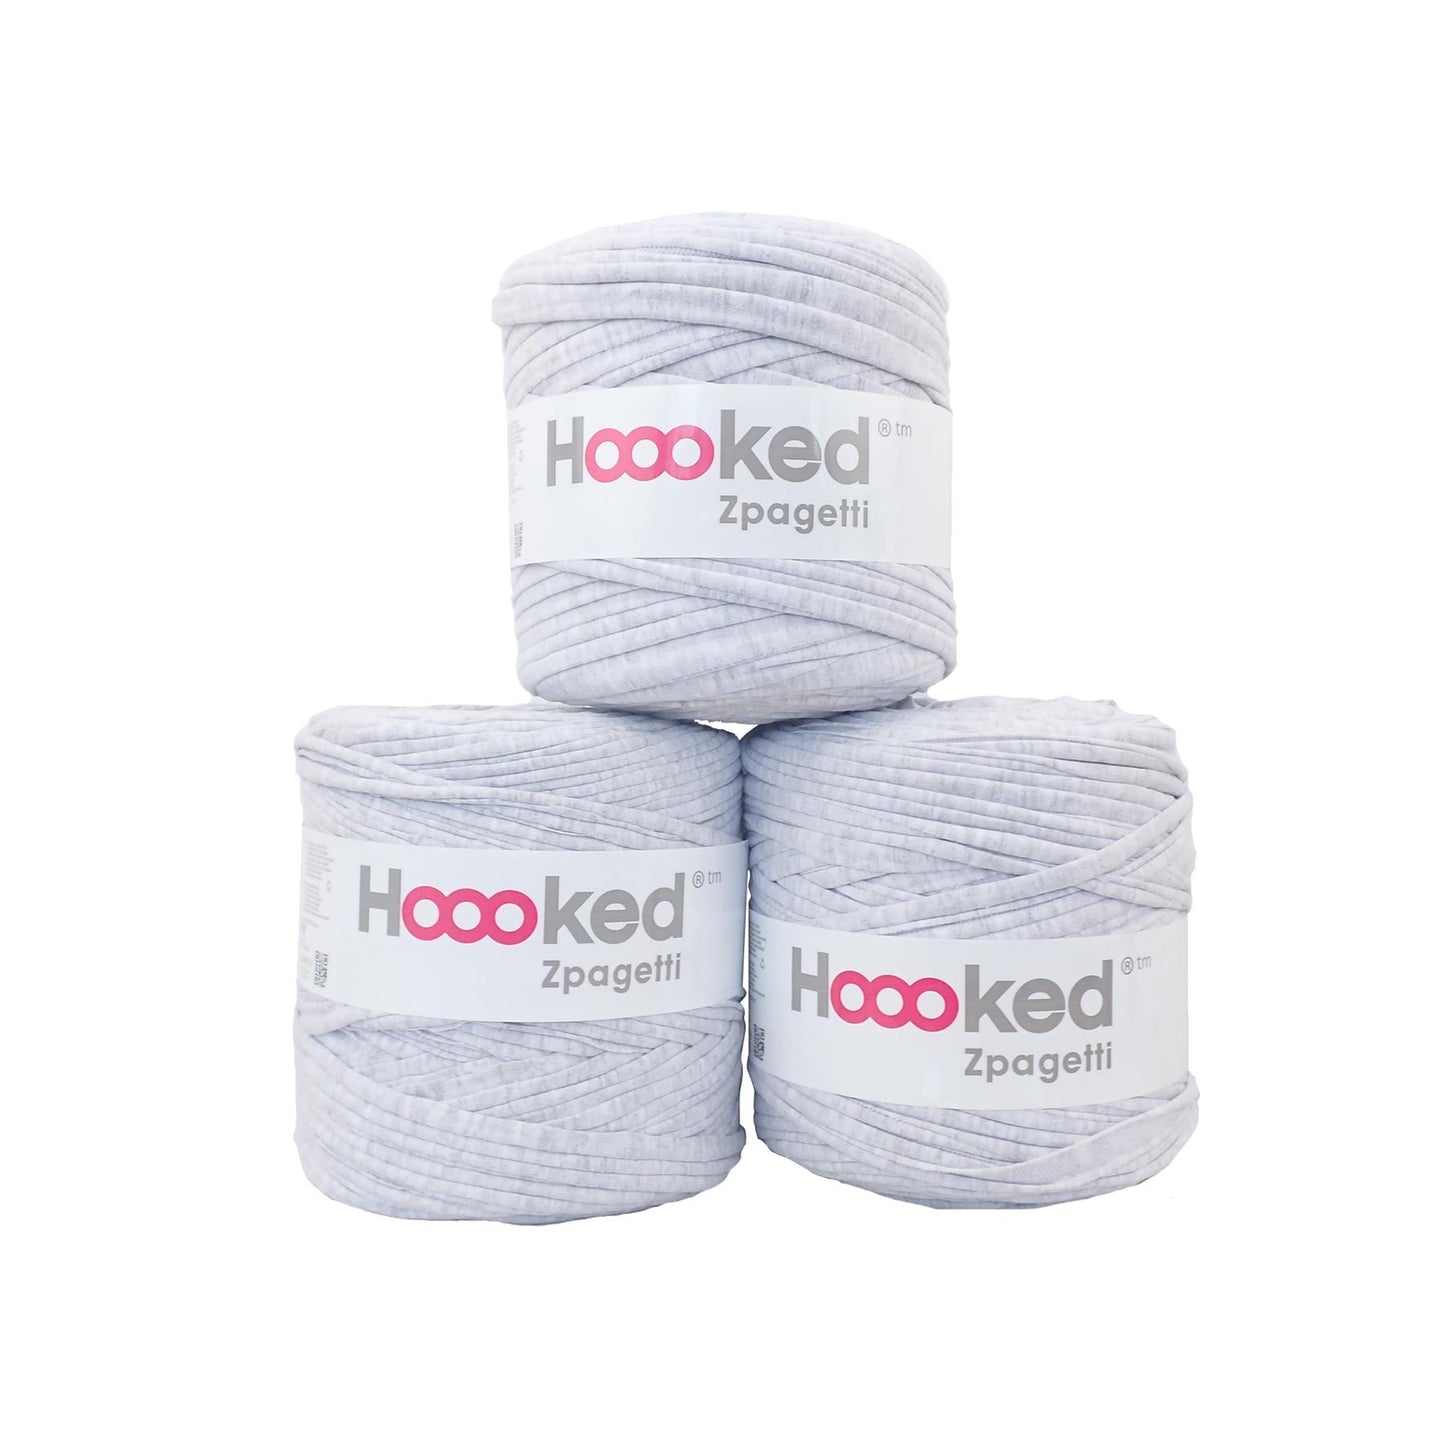 Hoooked Zpagetti Grey Cotton T-Shirt Yarn - 120M 700g (Pack of 3)